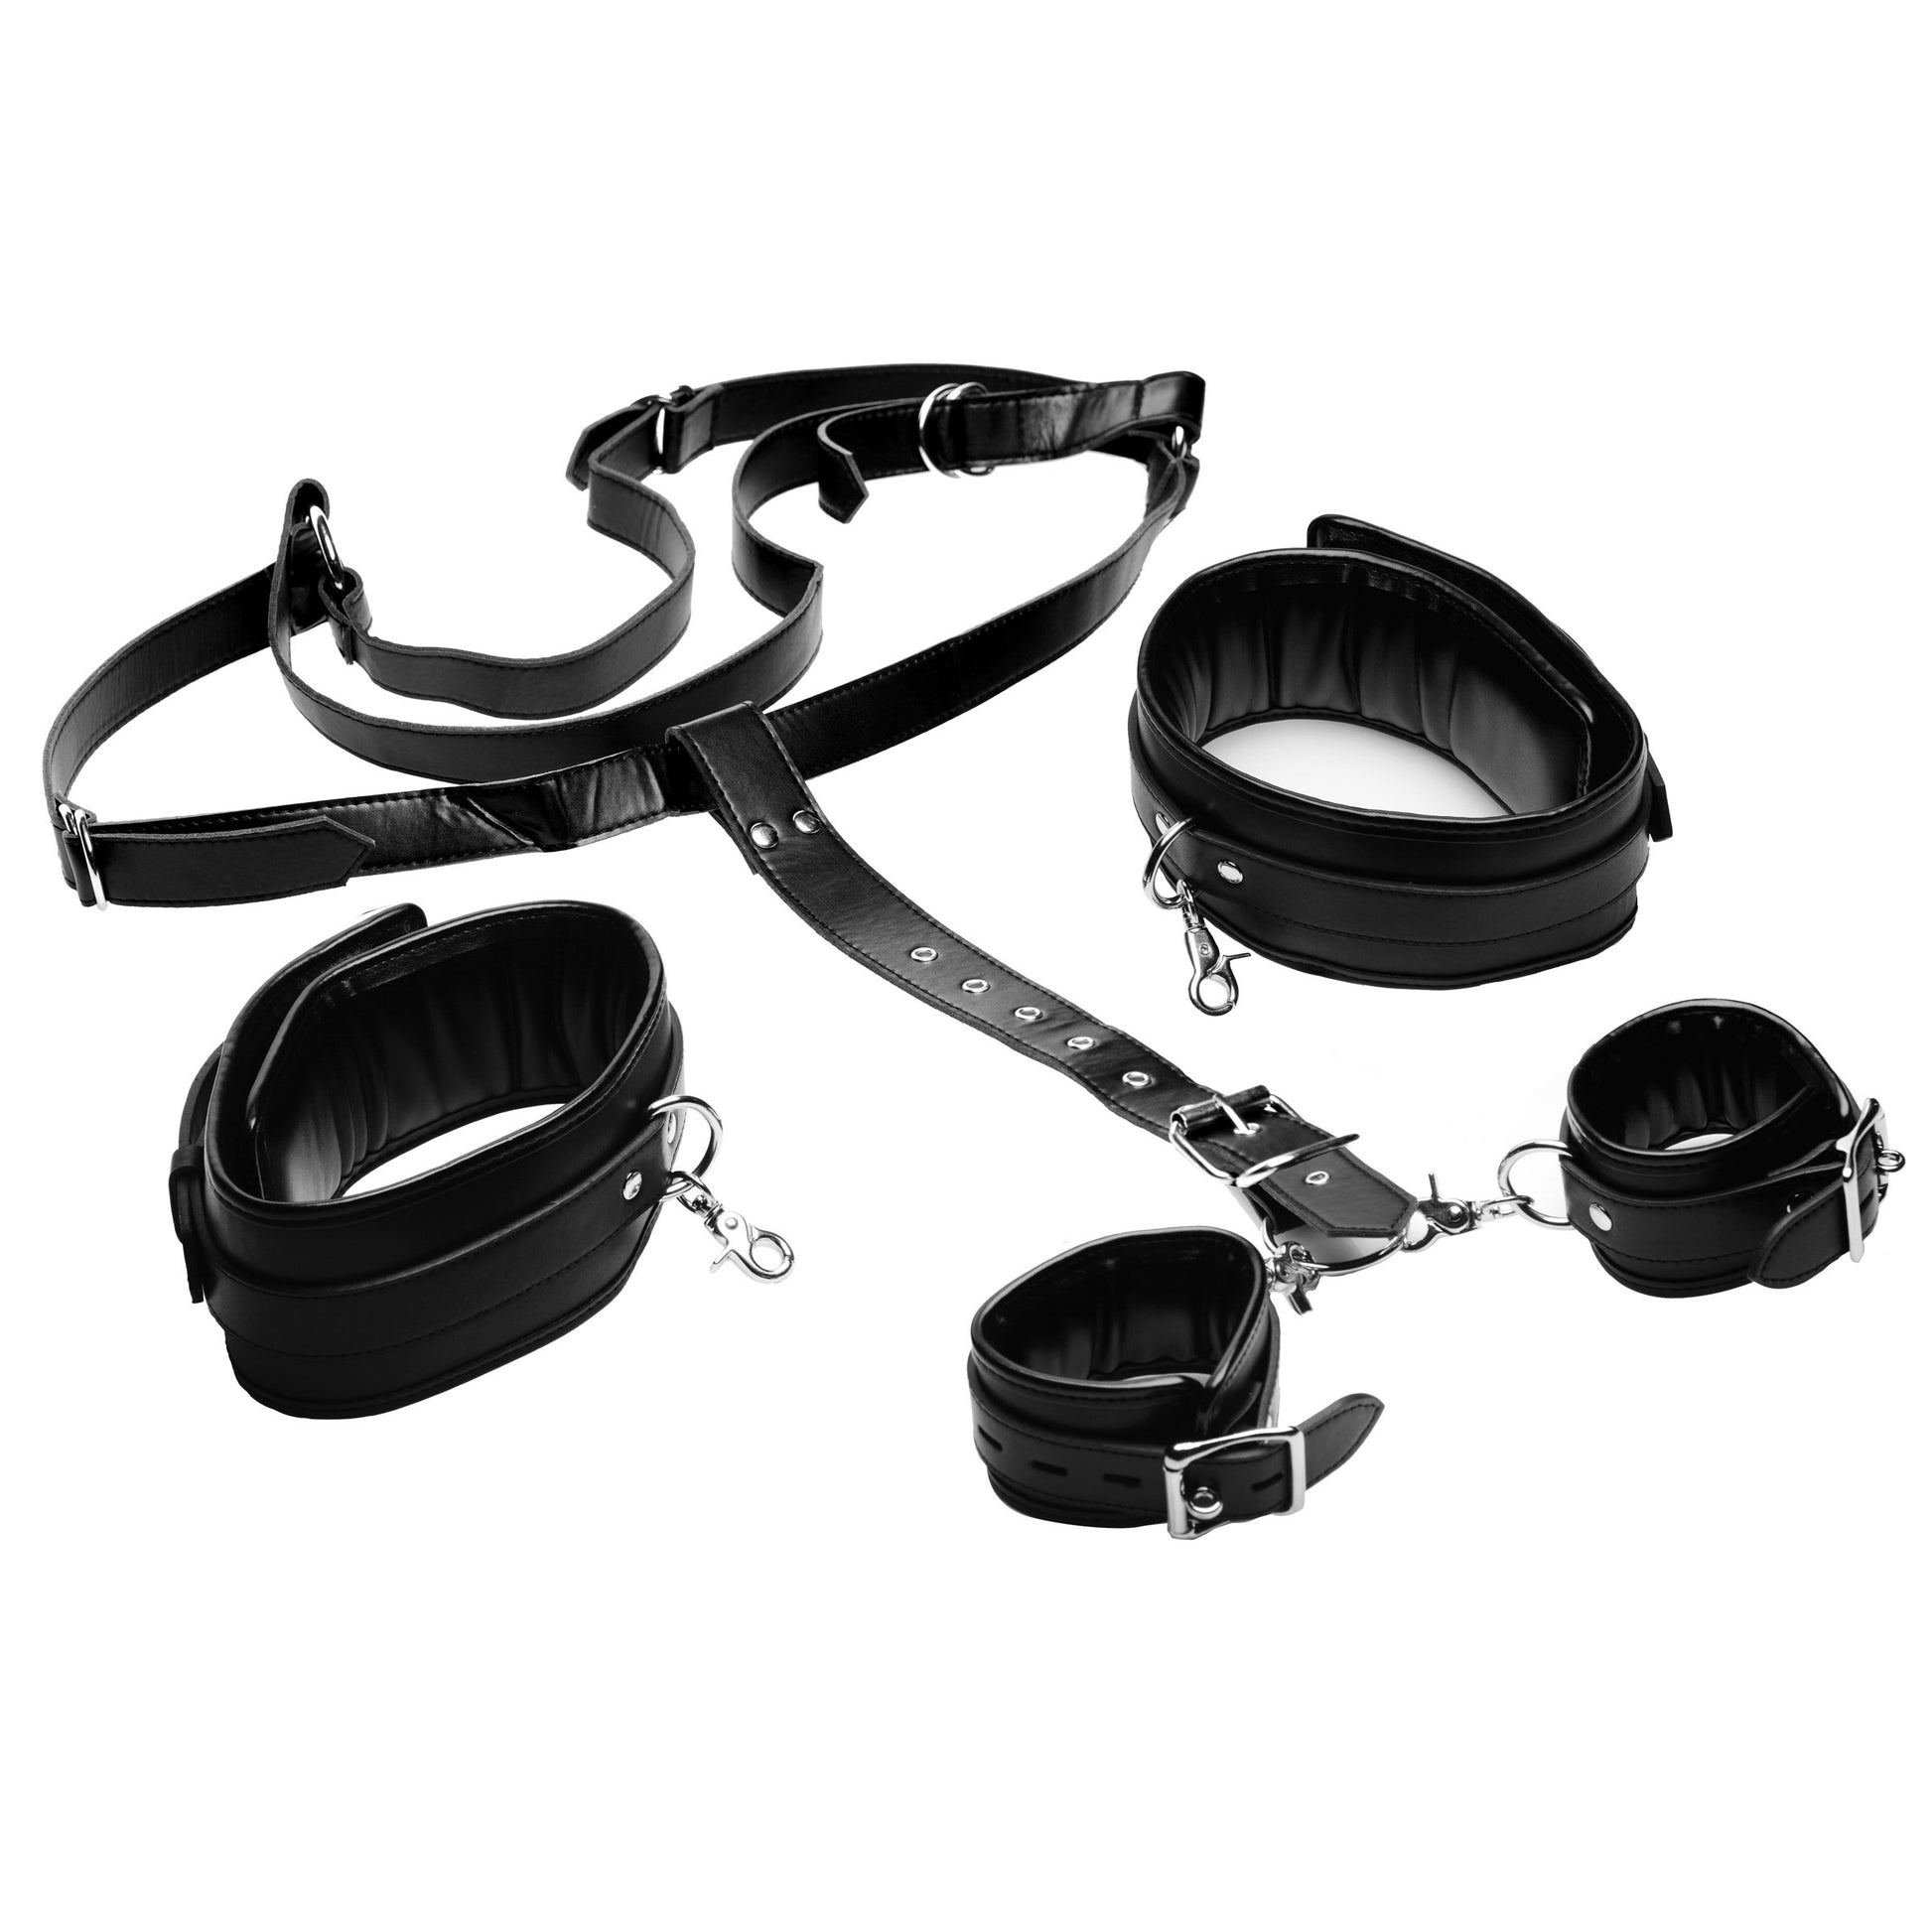 Deluxe Thigh Sling With Wrist Cuffs - UABDSM